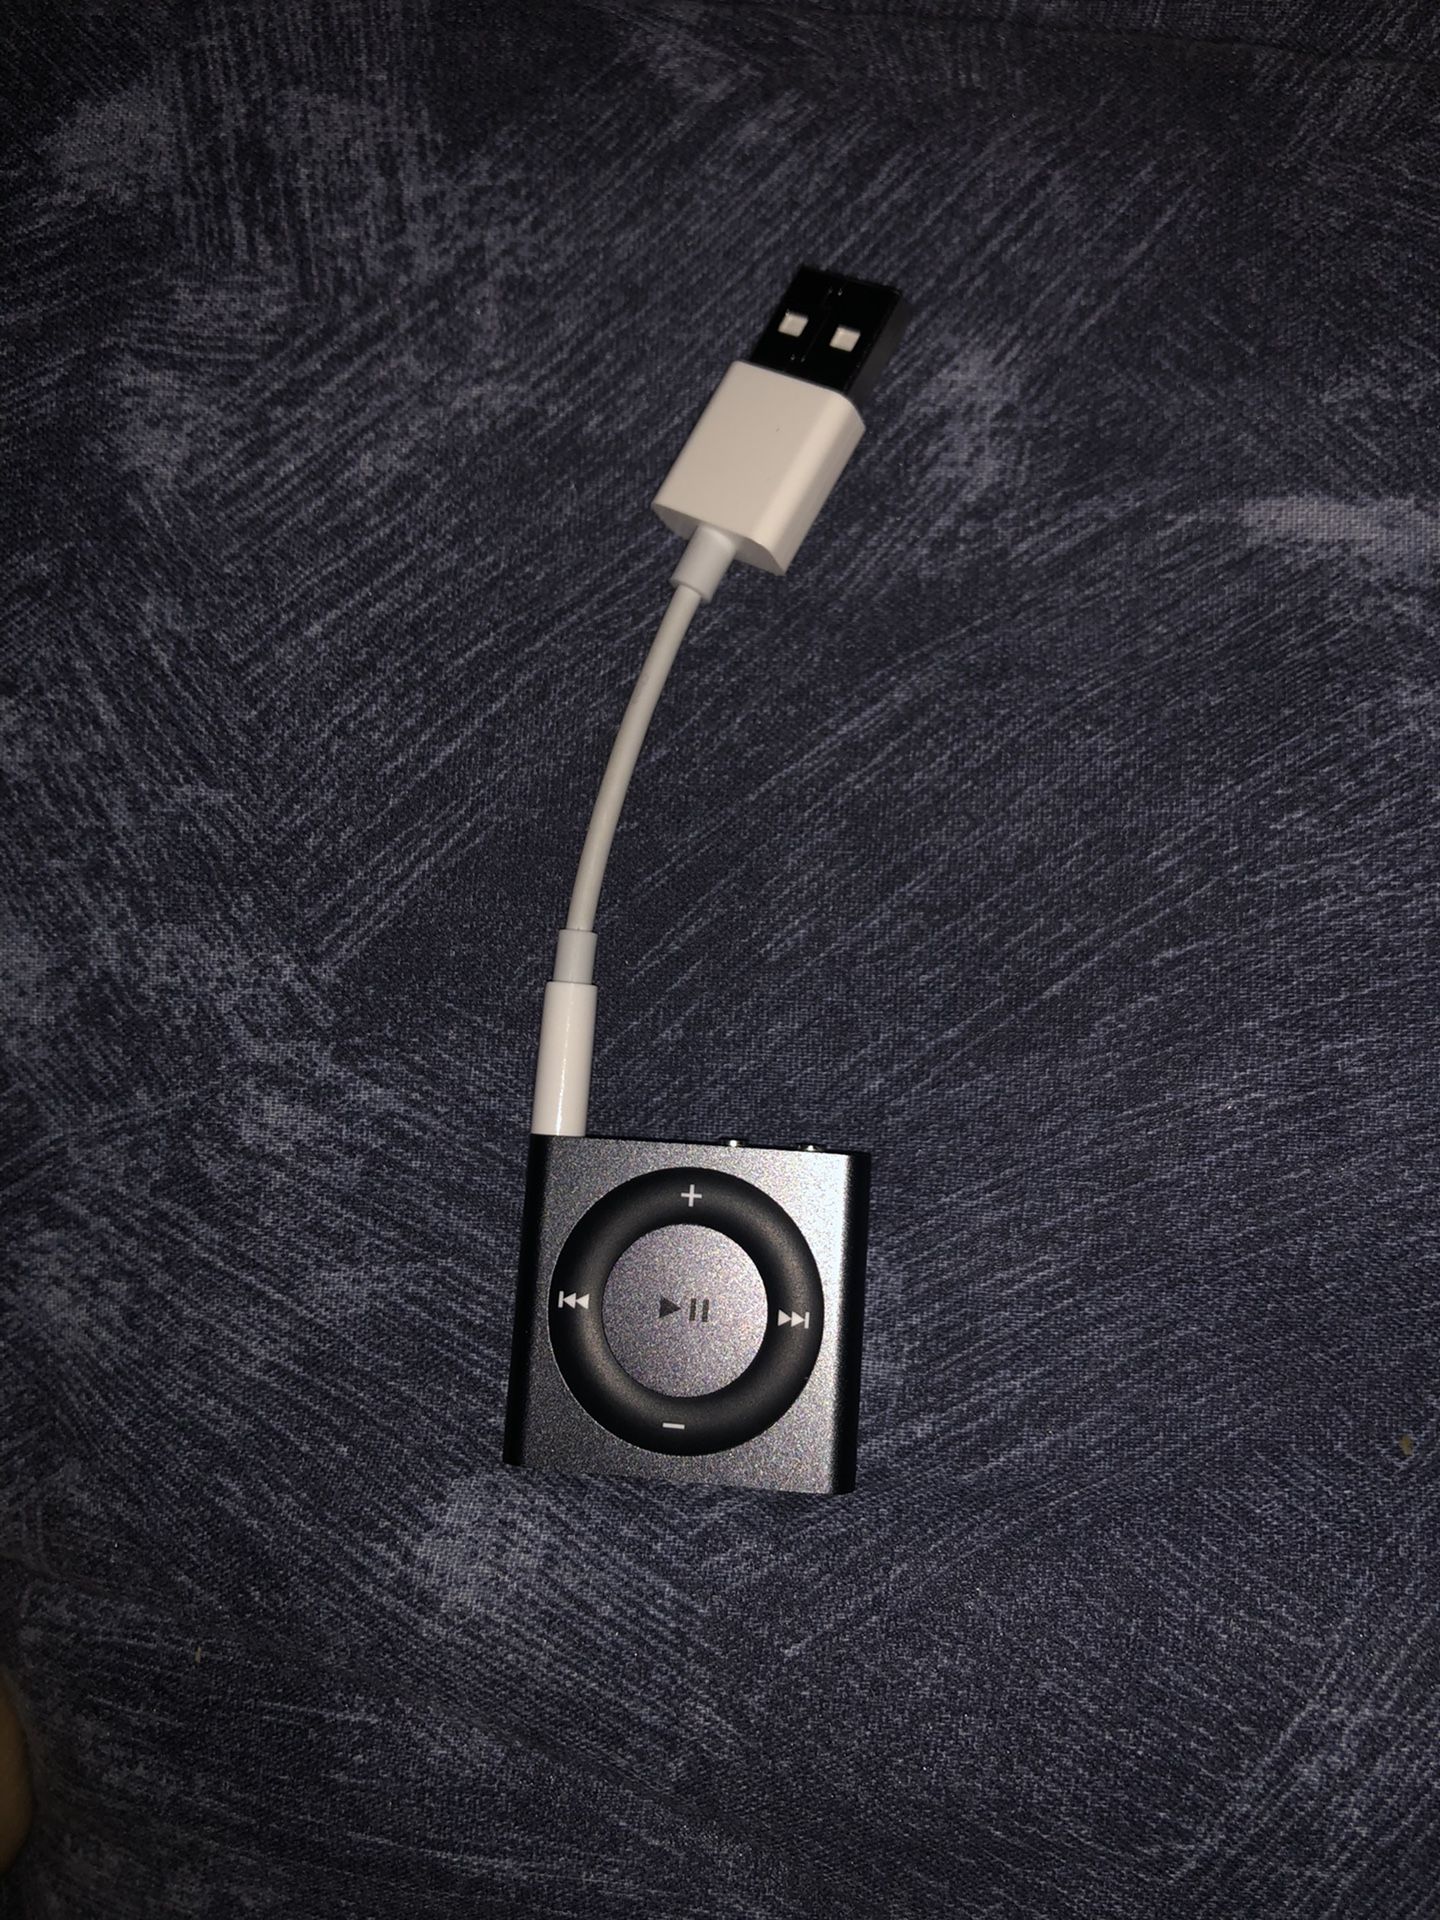 iPod shuffle with charger